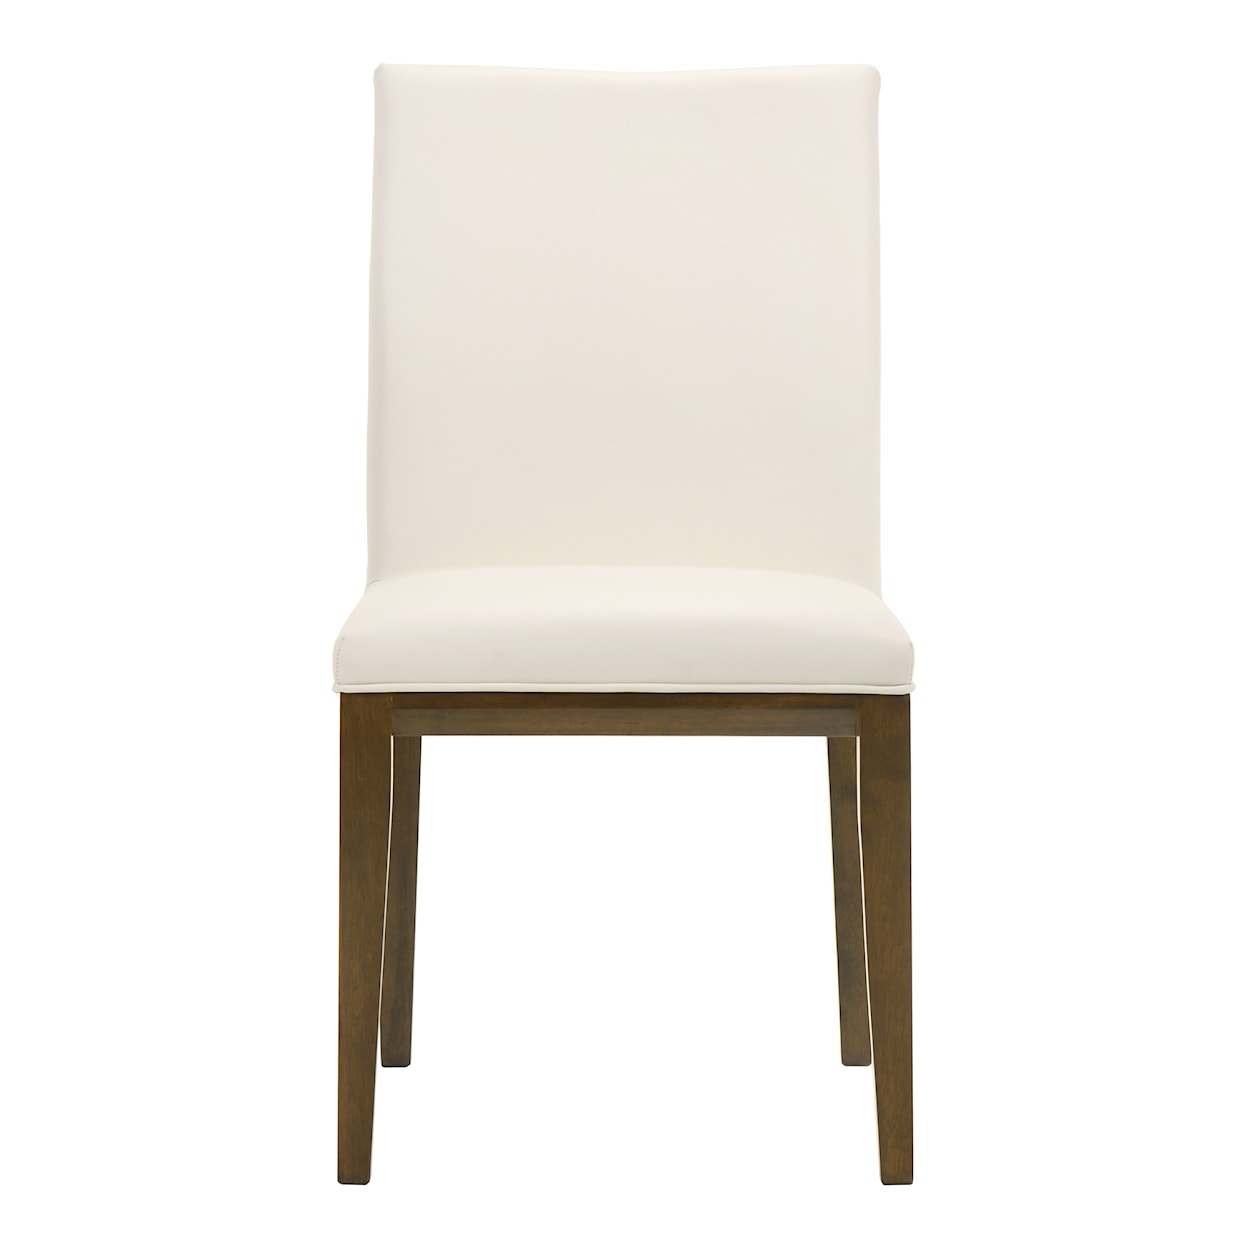 Moe's Home Collection Frankie Frankie Dining Chair White-M2